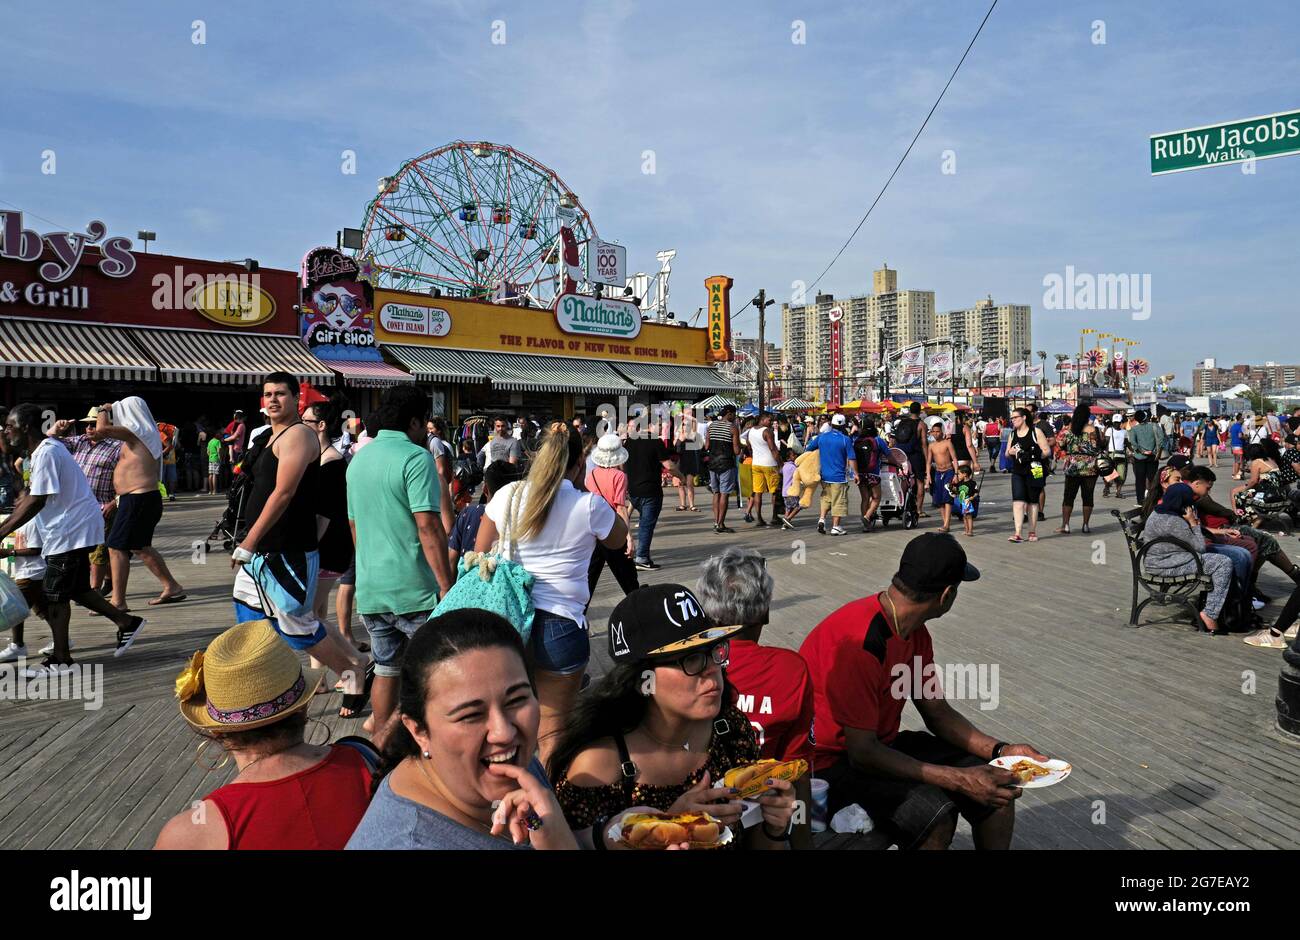 People on Coney Island boardwalk, during an hot summer's sunday afternoon, in New York City. Stock Photo